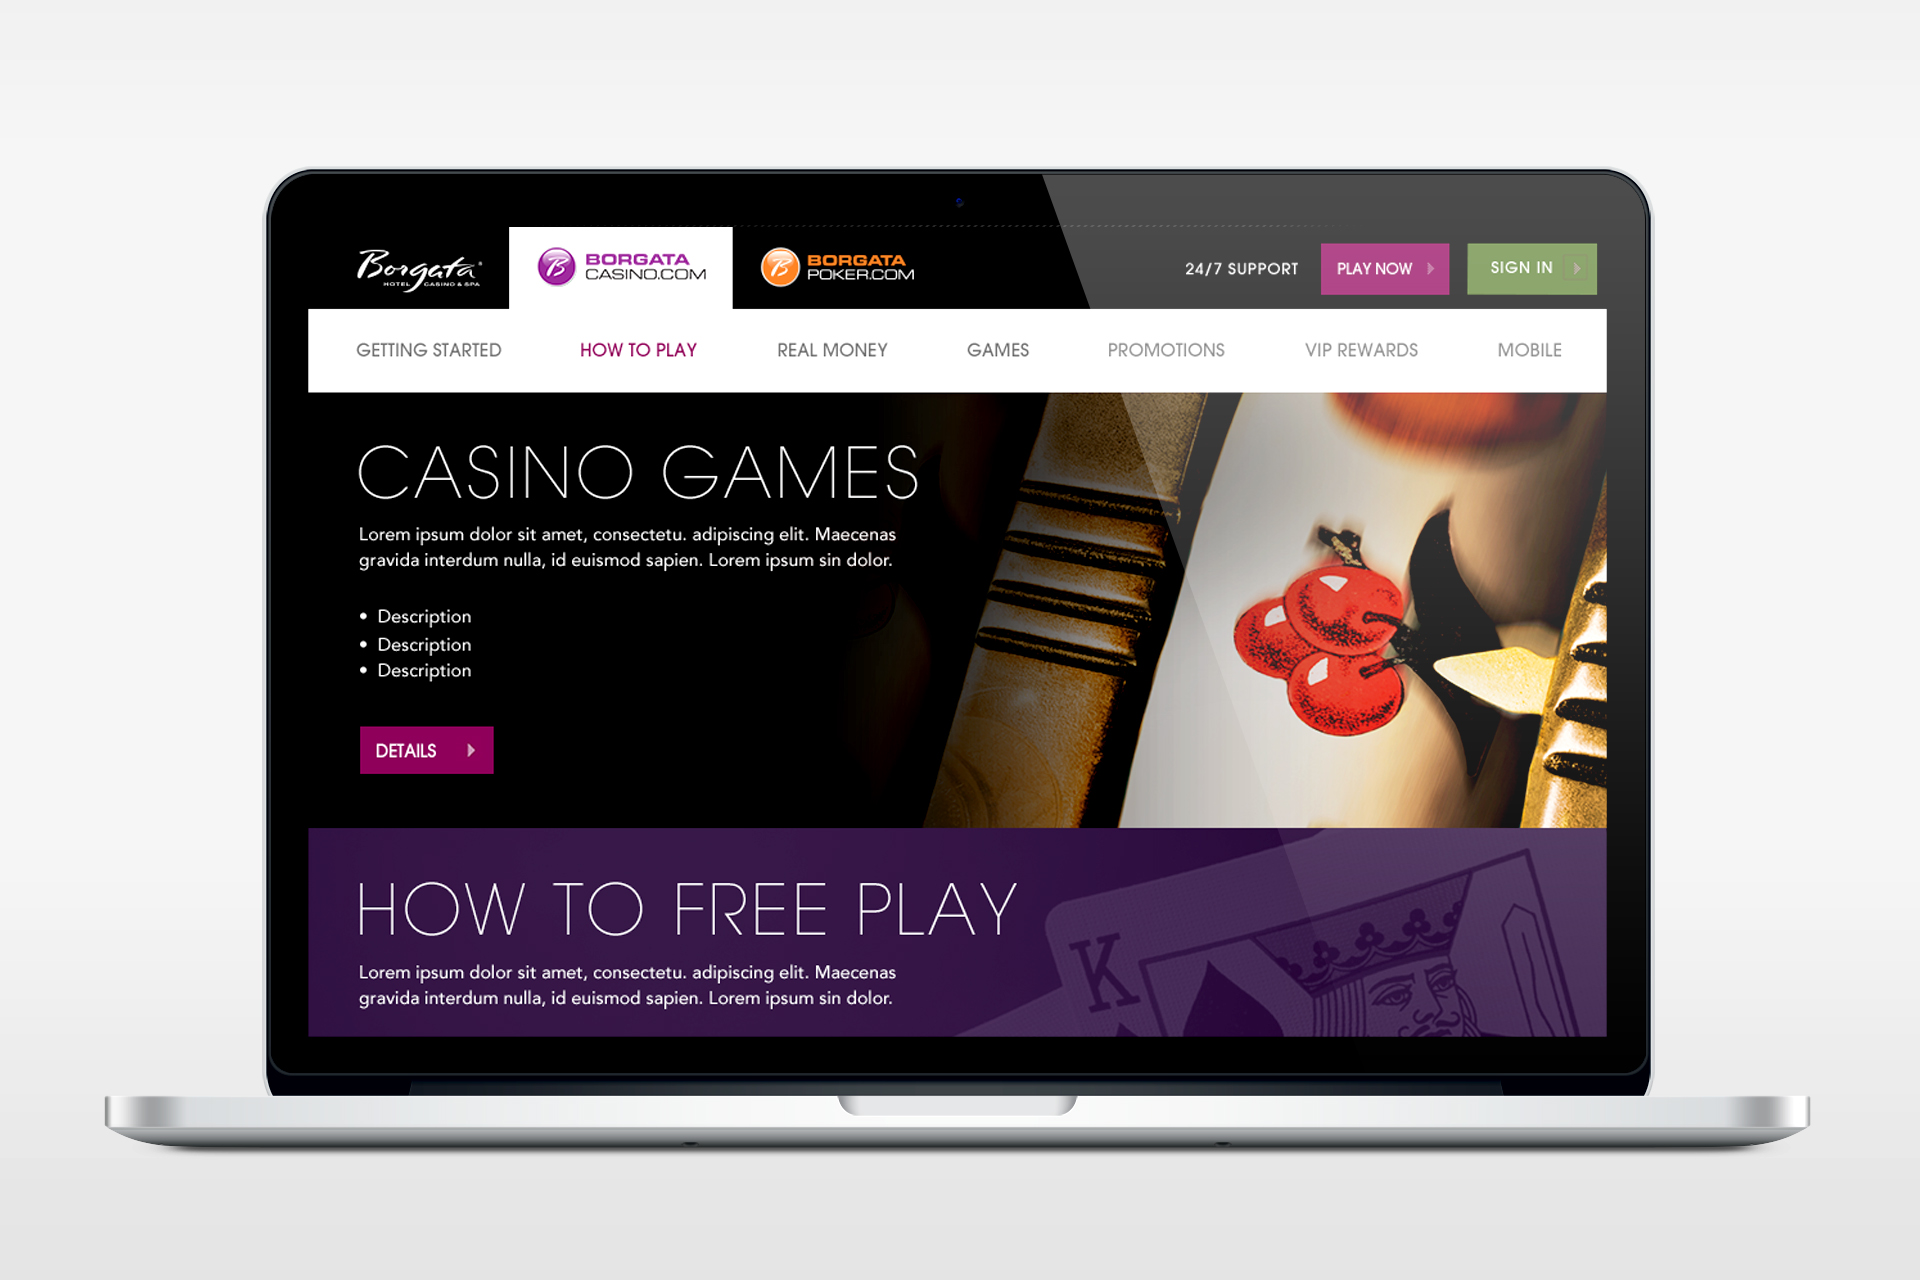 BetMGM Poker: An Exciting Online Gaming Experience